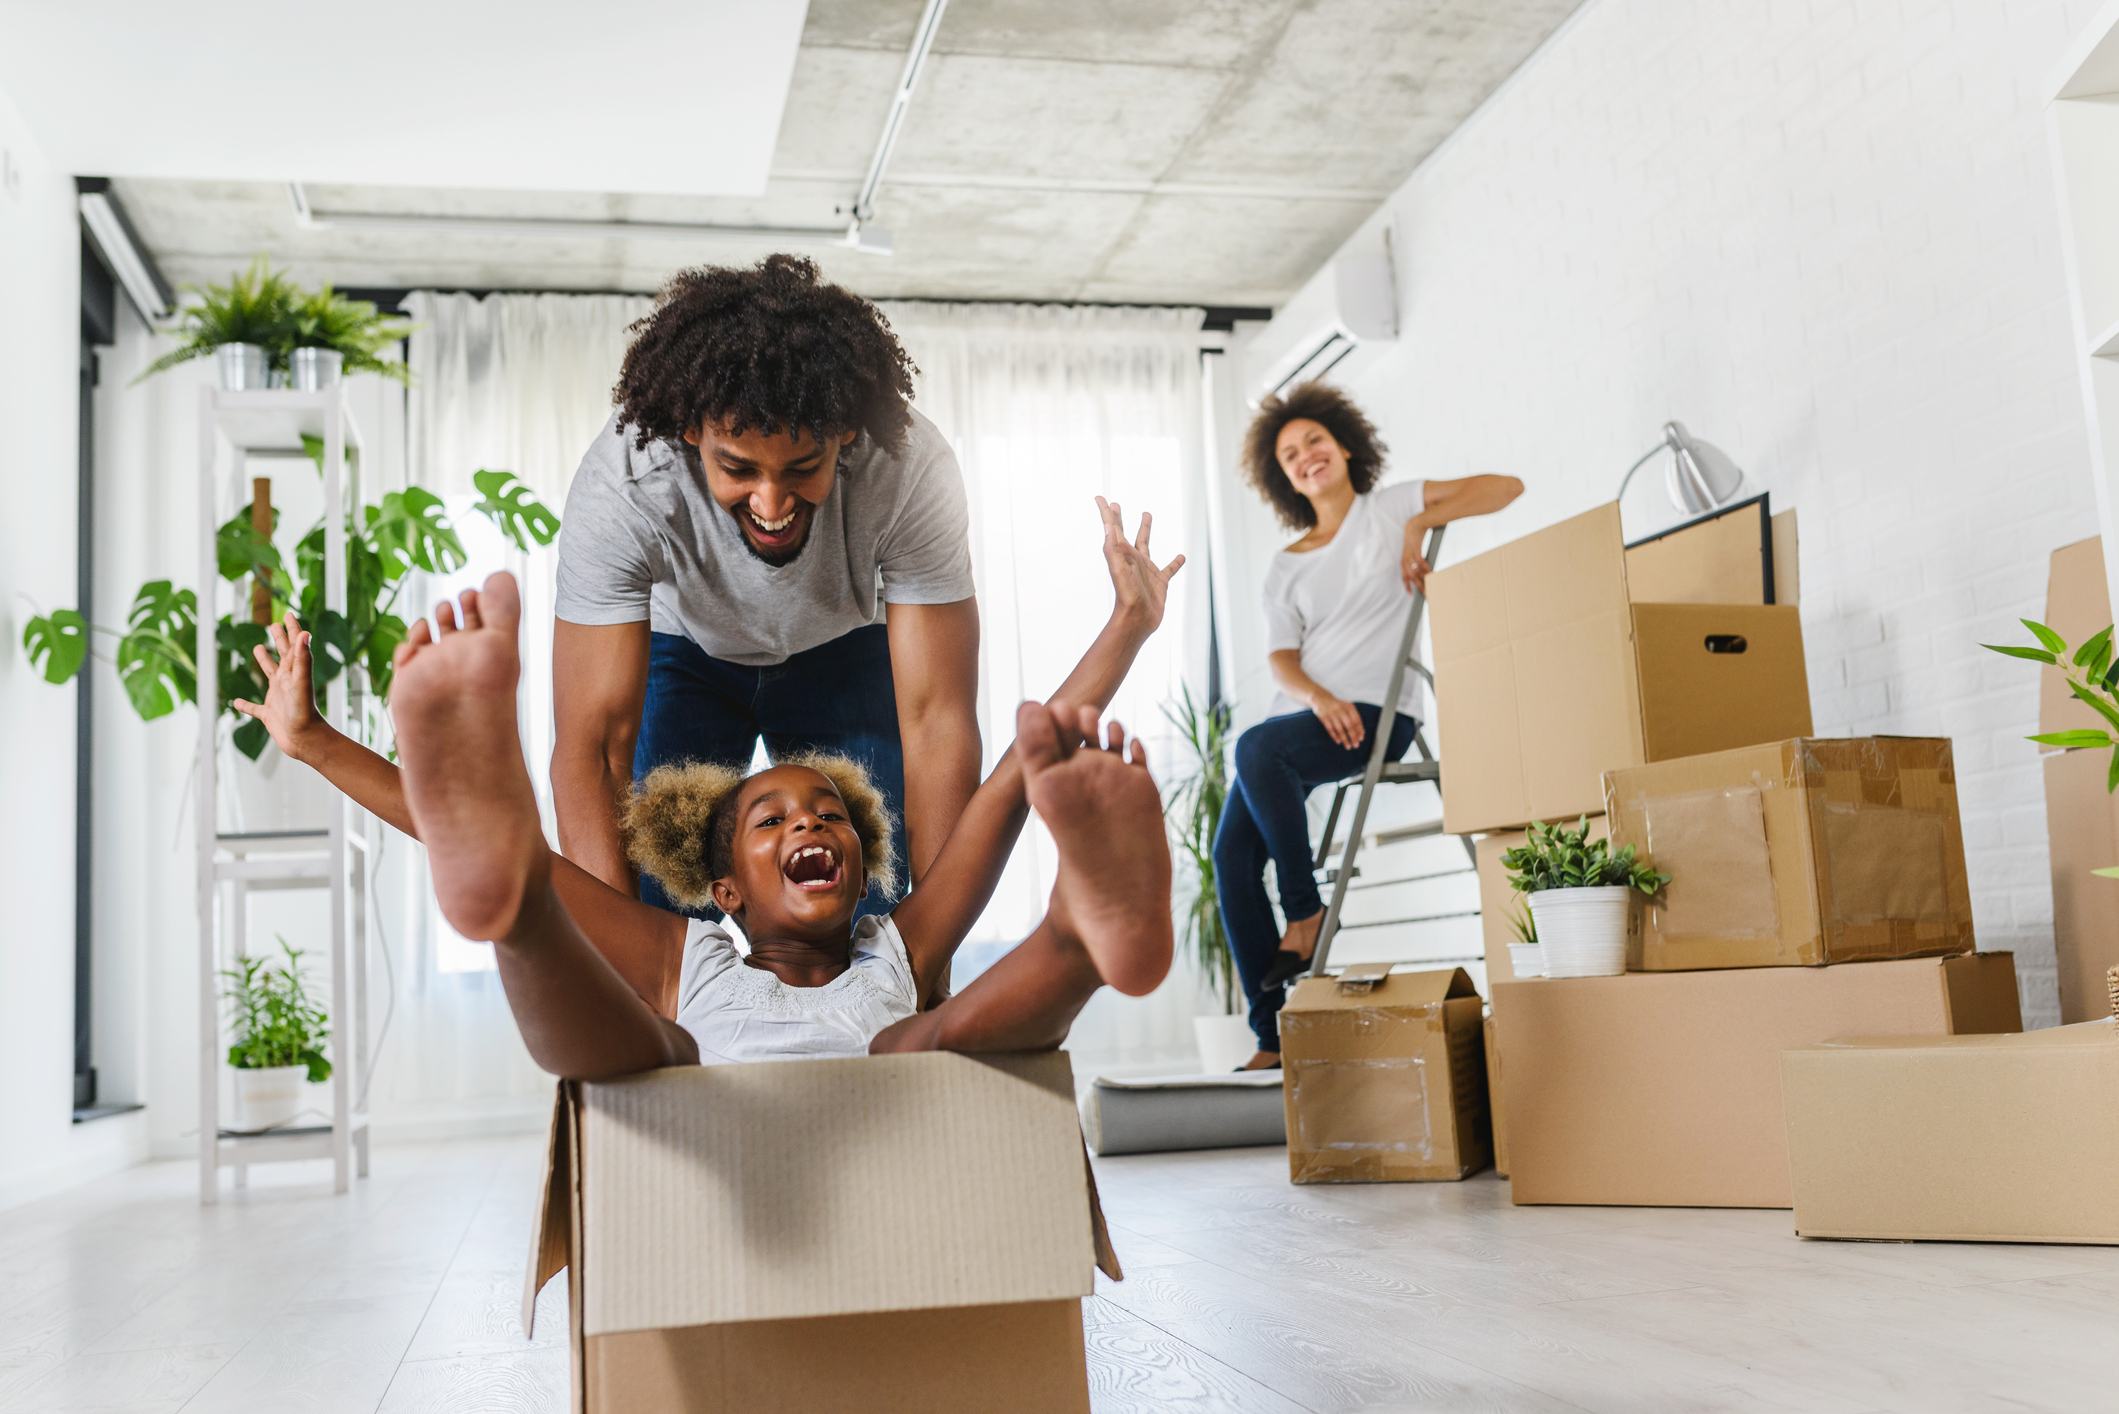 Relocation Advice: How to Find Temporary Housing Before Moving Into Your New Home